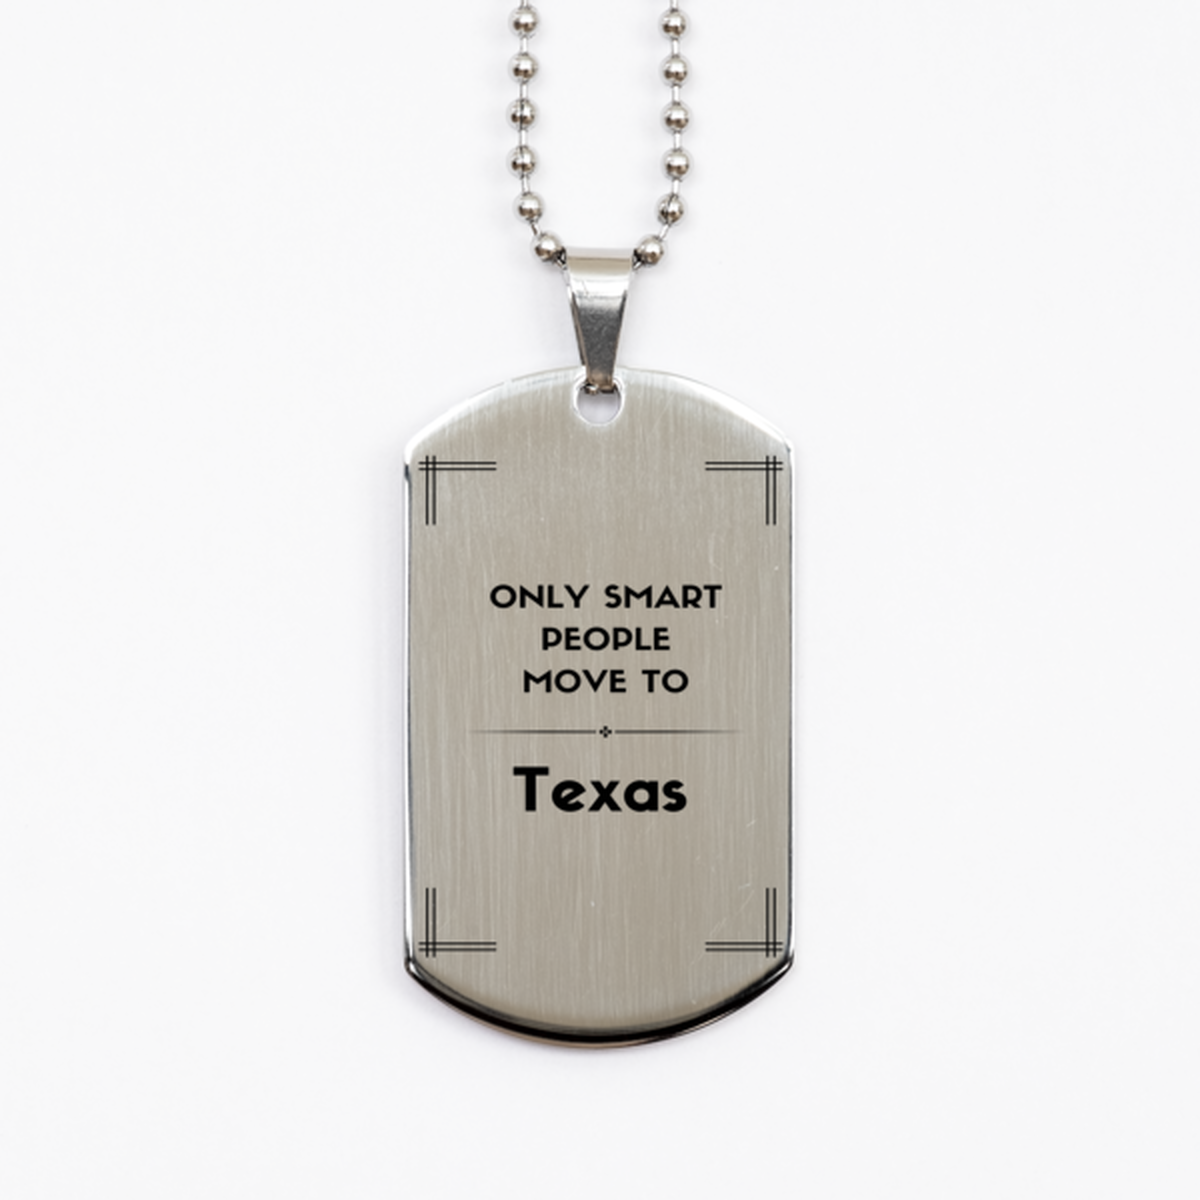 Only smart people move to Texas Silver Dog Tag, Gag Gifts For Texas, Move to Texas Gifts for Friends Coworker Funny Saying Quote